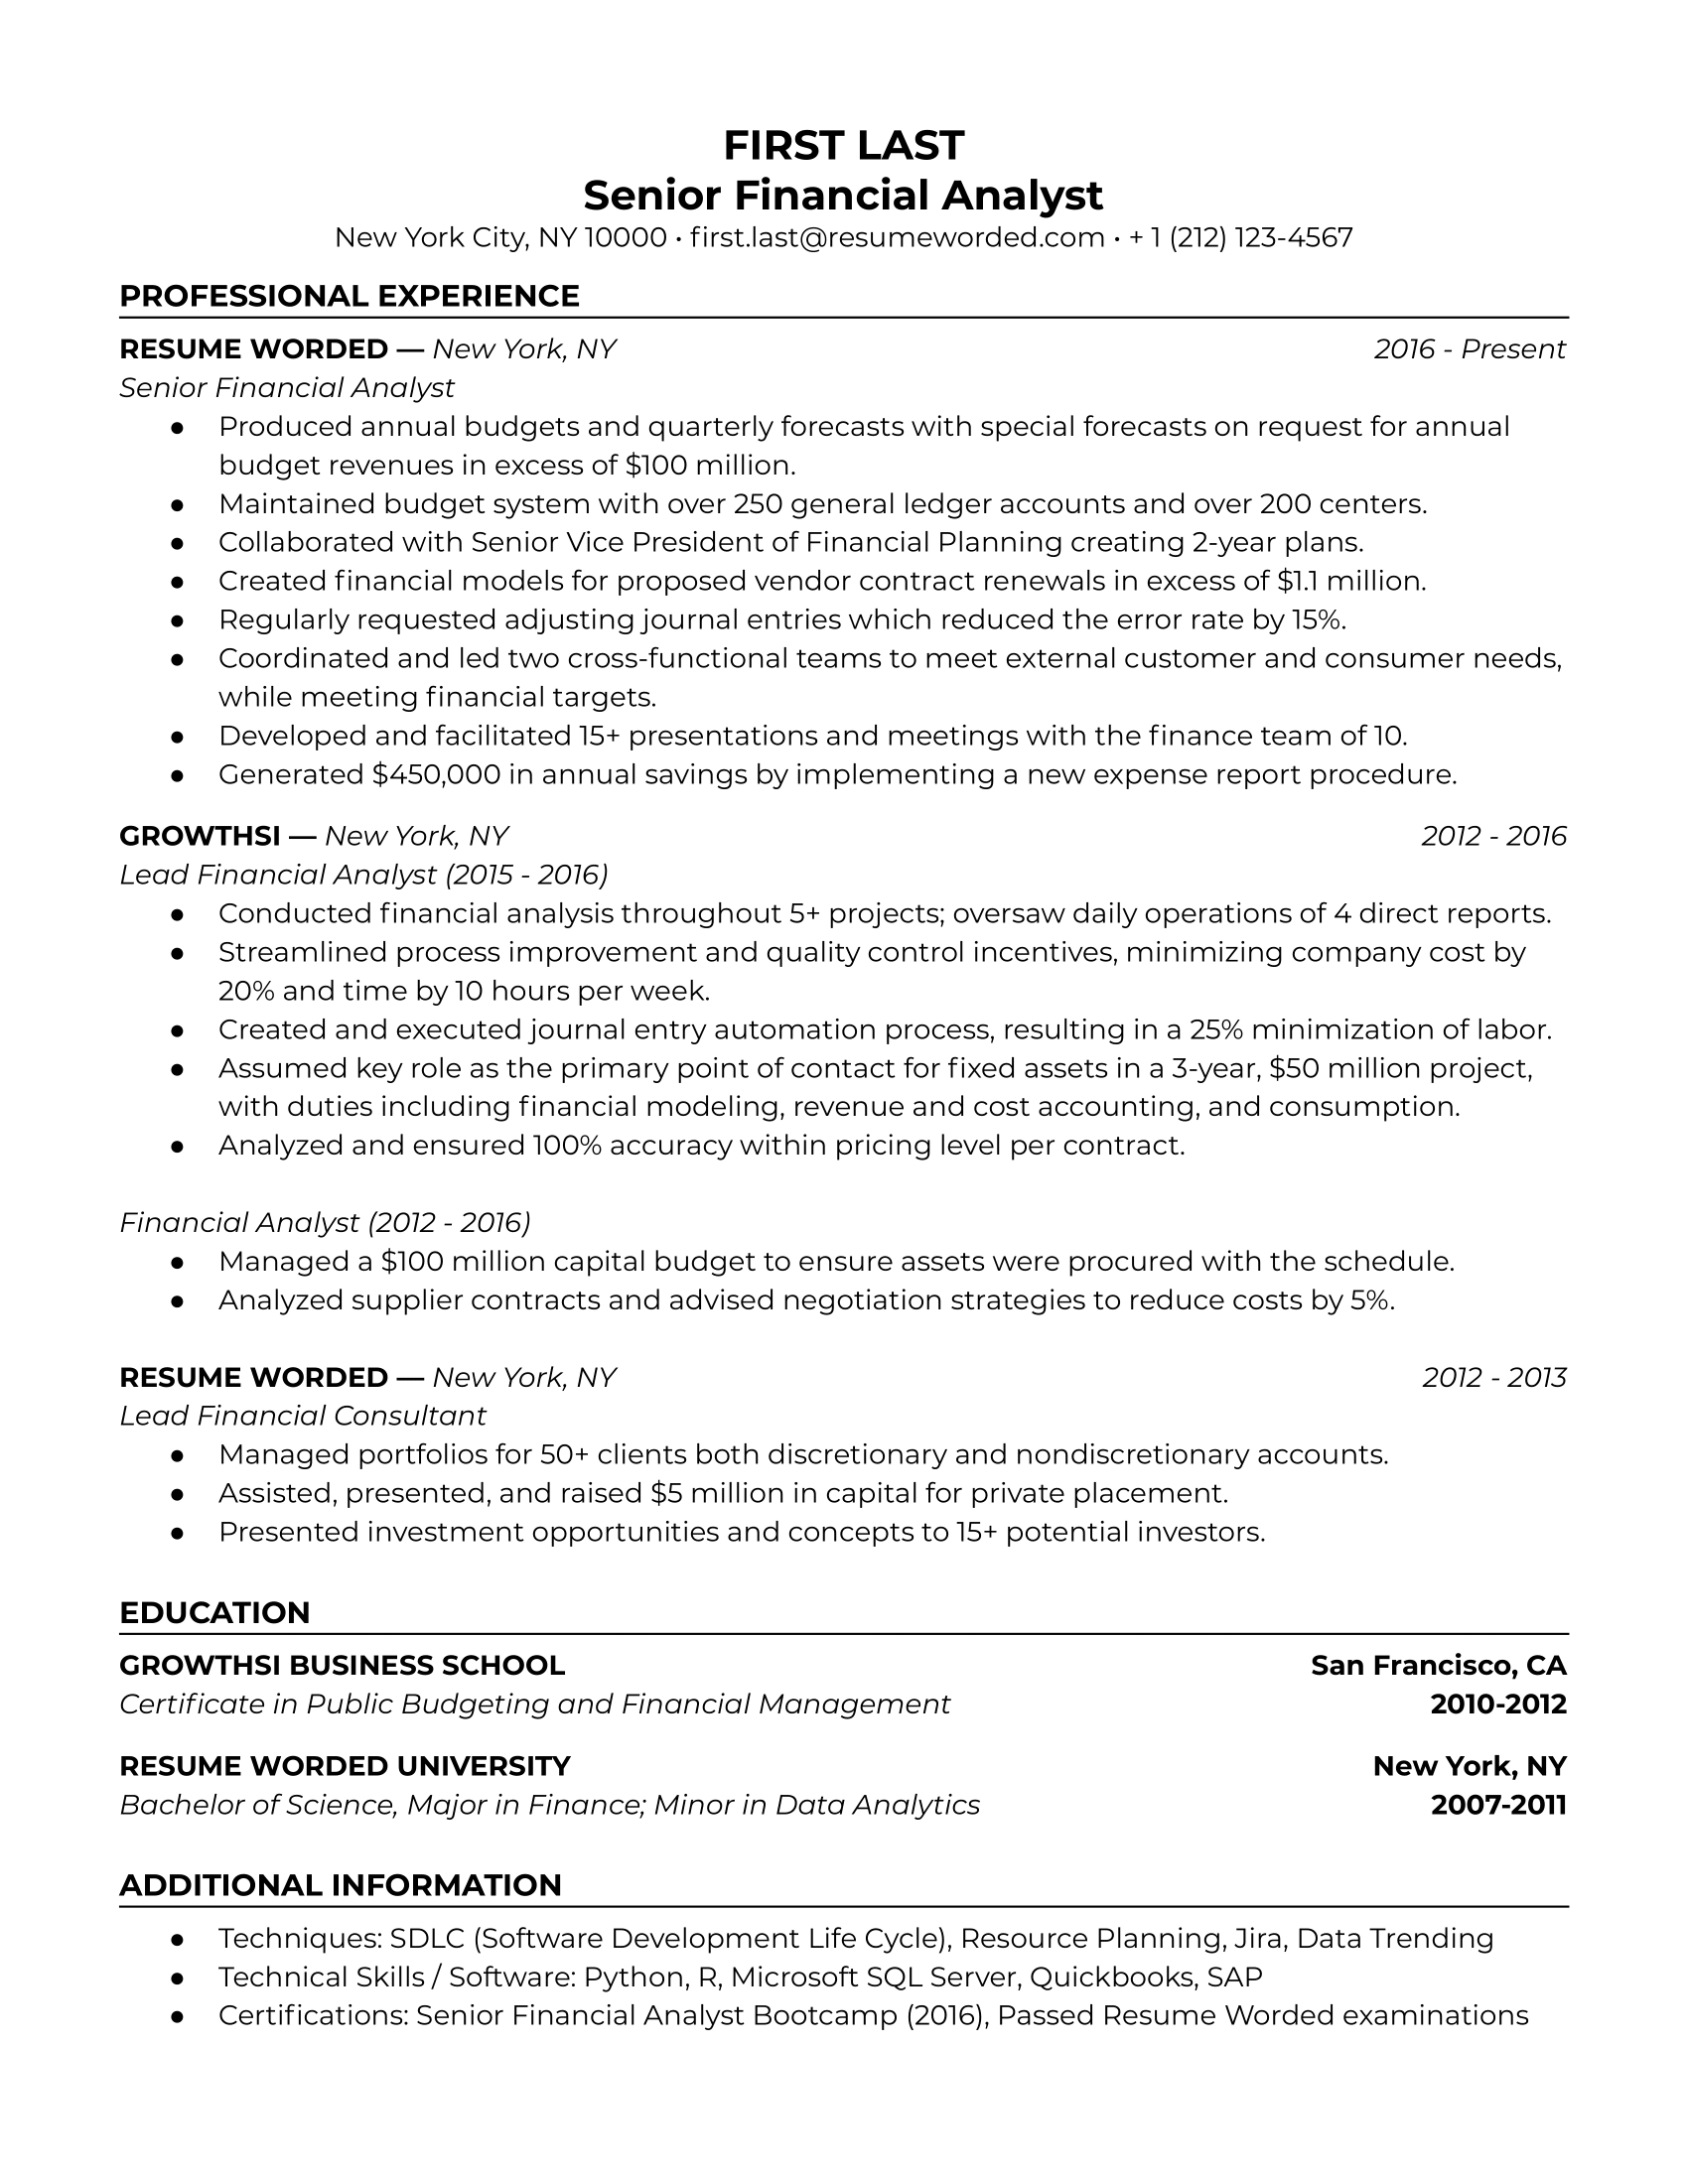 Senior financial analyst resume with relevant work history and past promotions